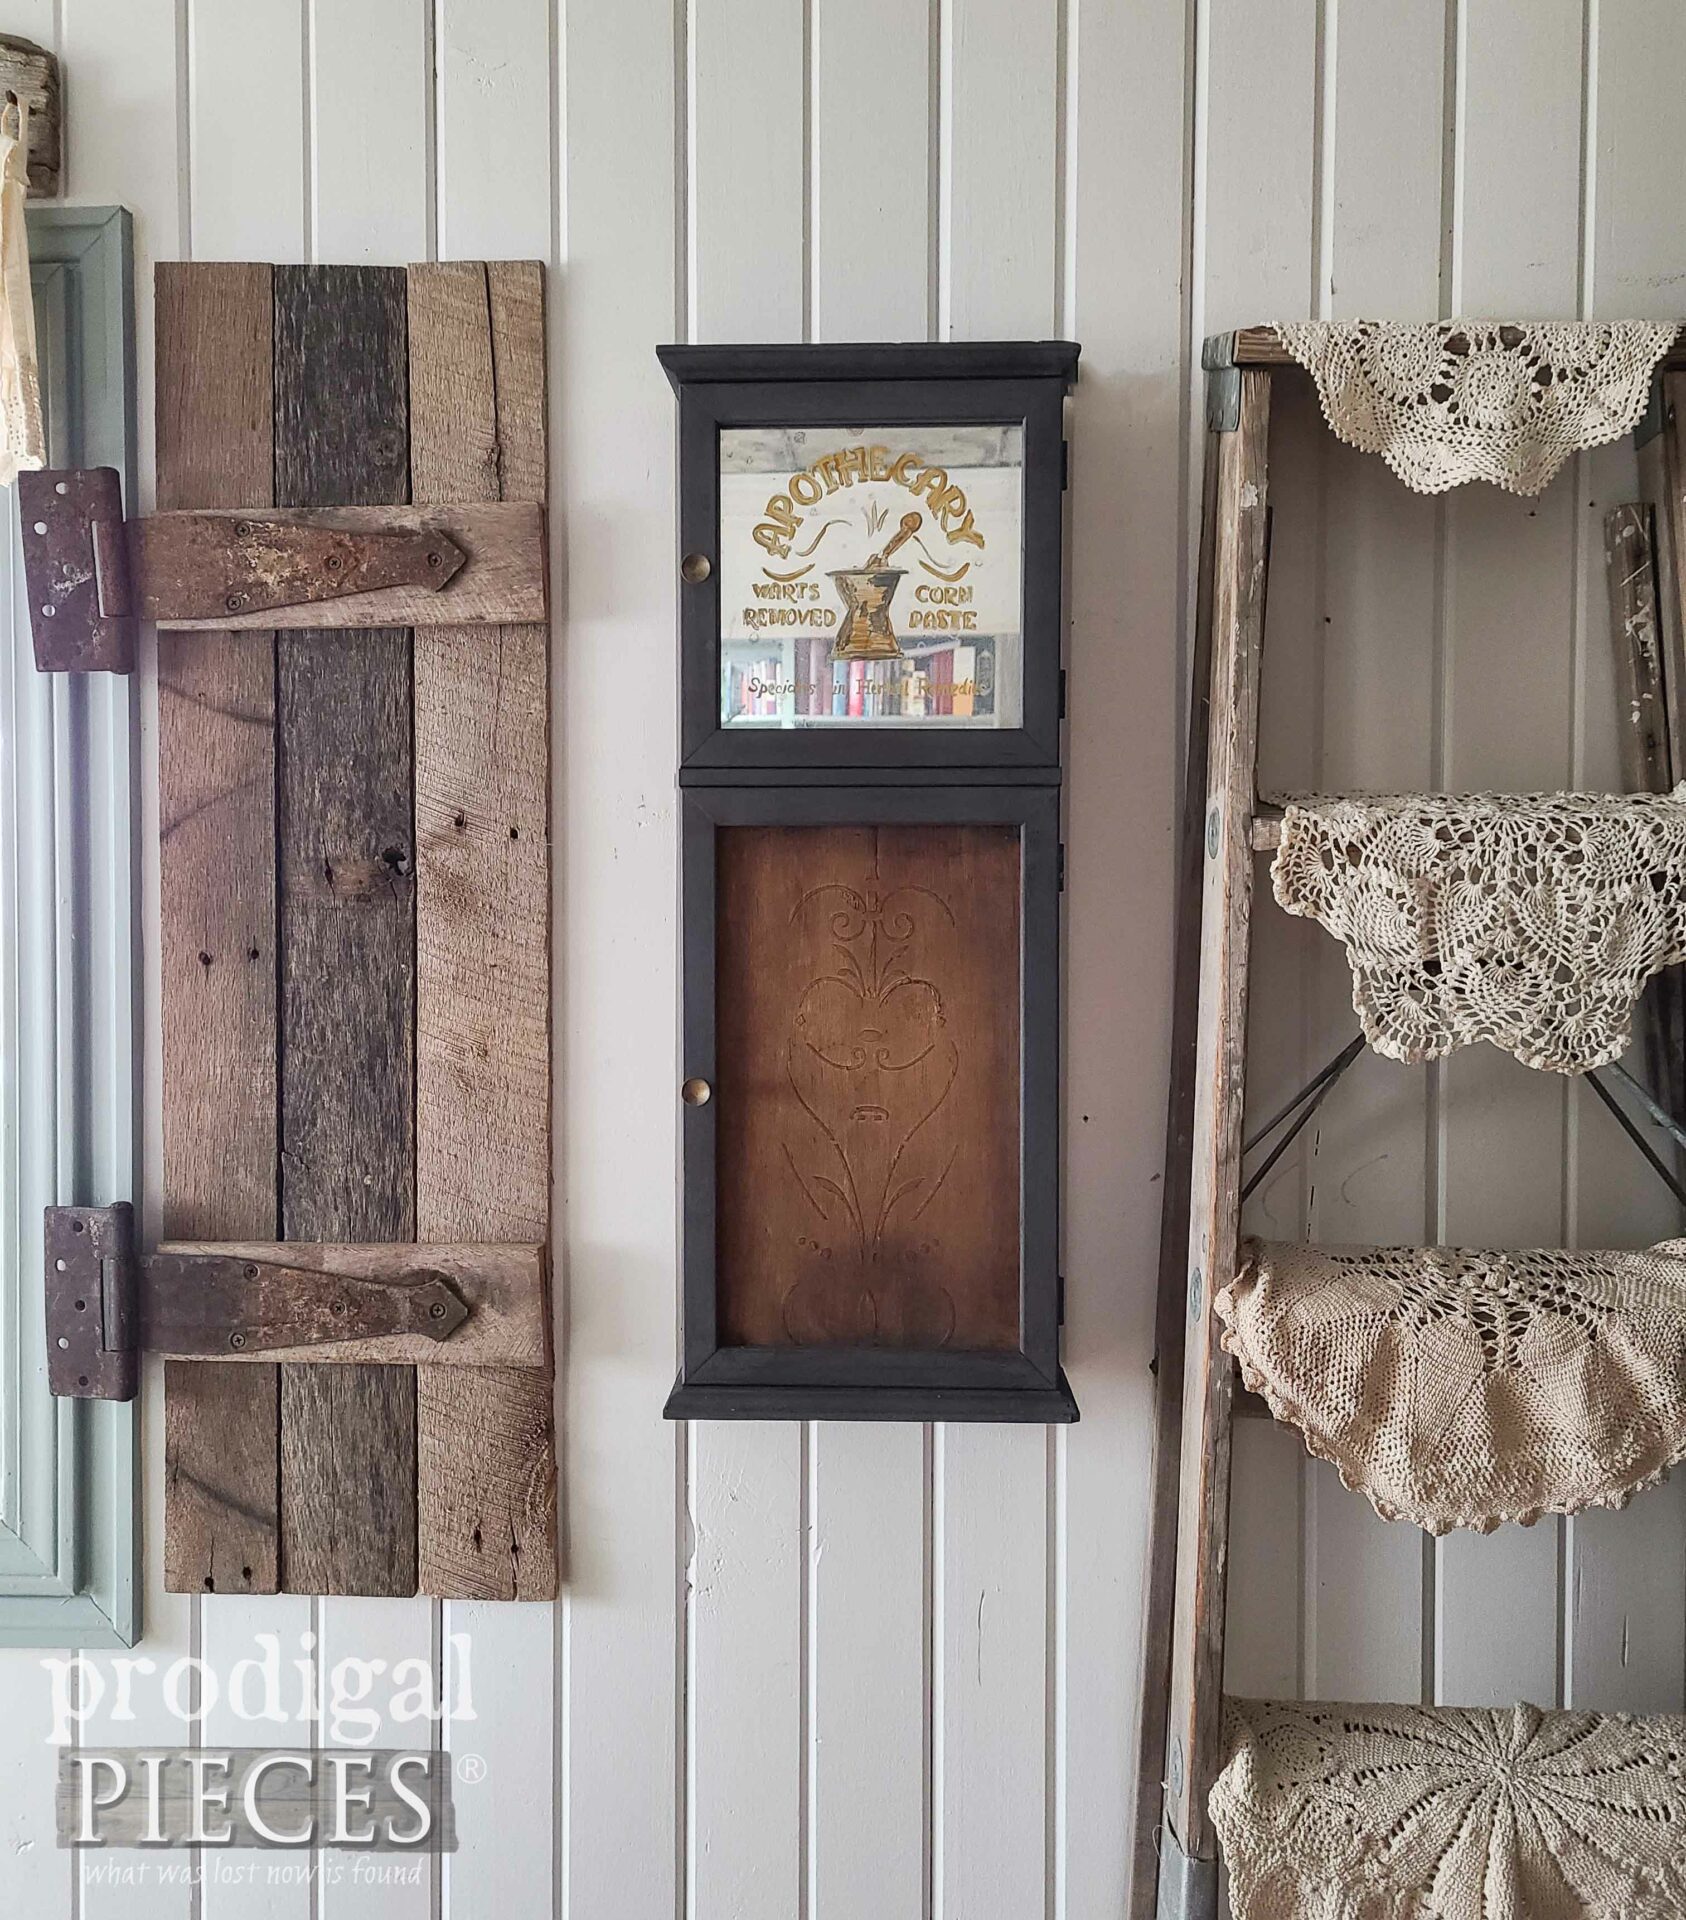 Upcycled Clock Cabinet Turned Apothecary Storage by Larissa of Prodigal Pieces | prodigalpieces.com #prodgalpieces